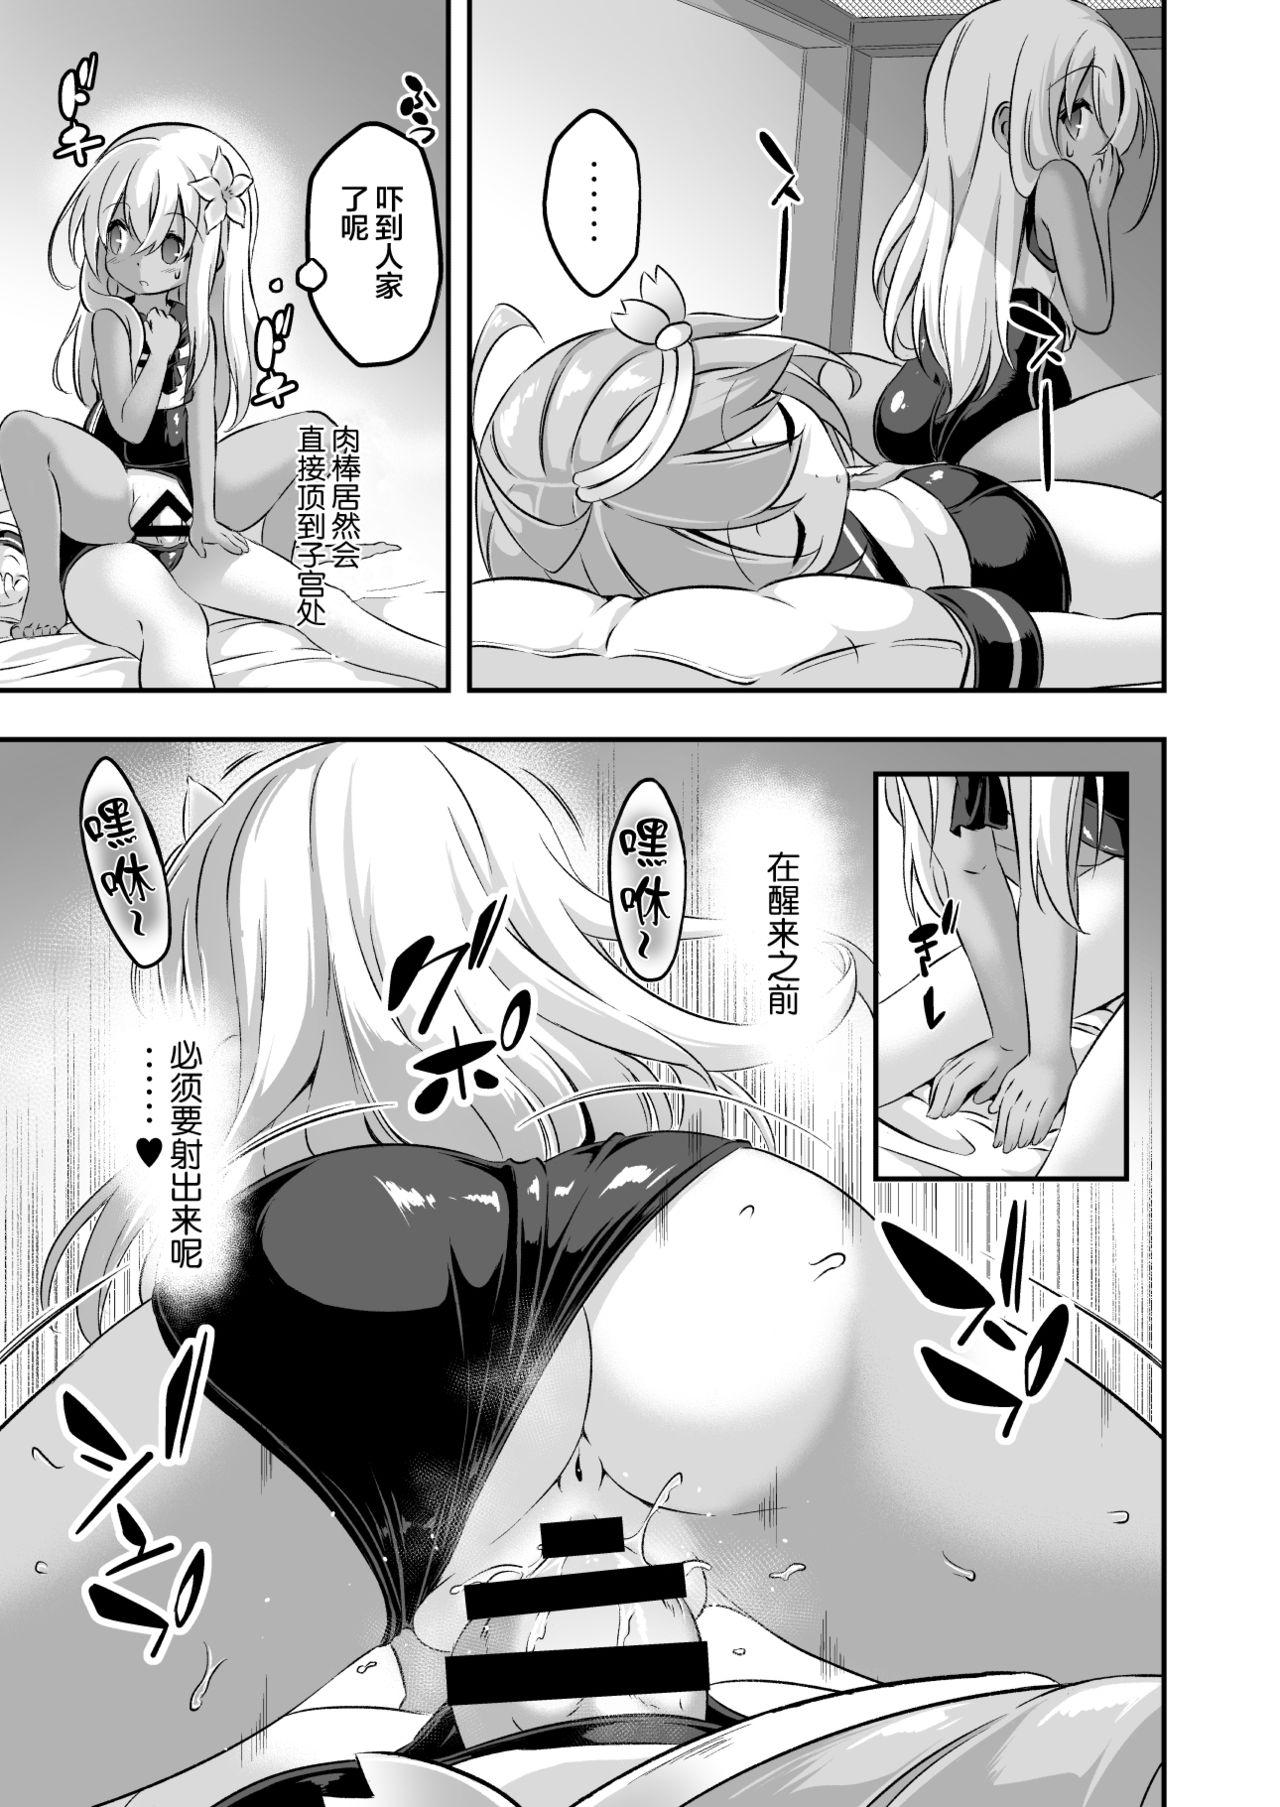 Jacking Off Loli & Futa Vol. 8 | 蘿莉&扶她 Vol.8 - Kantai collection Phat Ass - Page 11